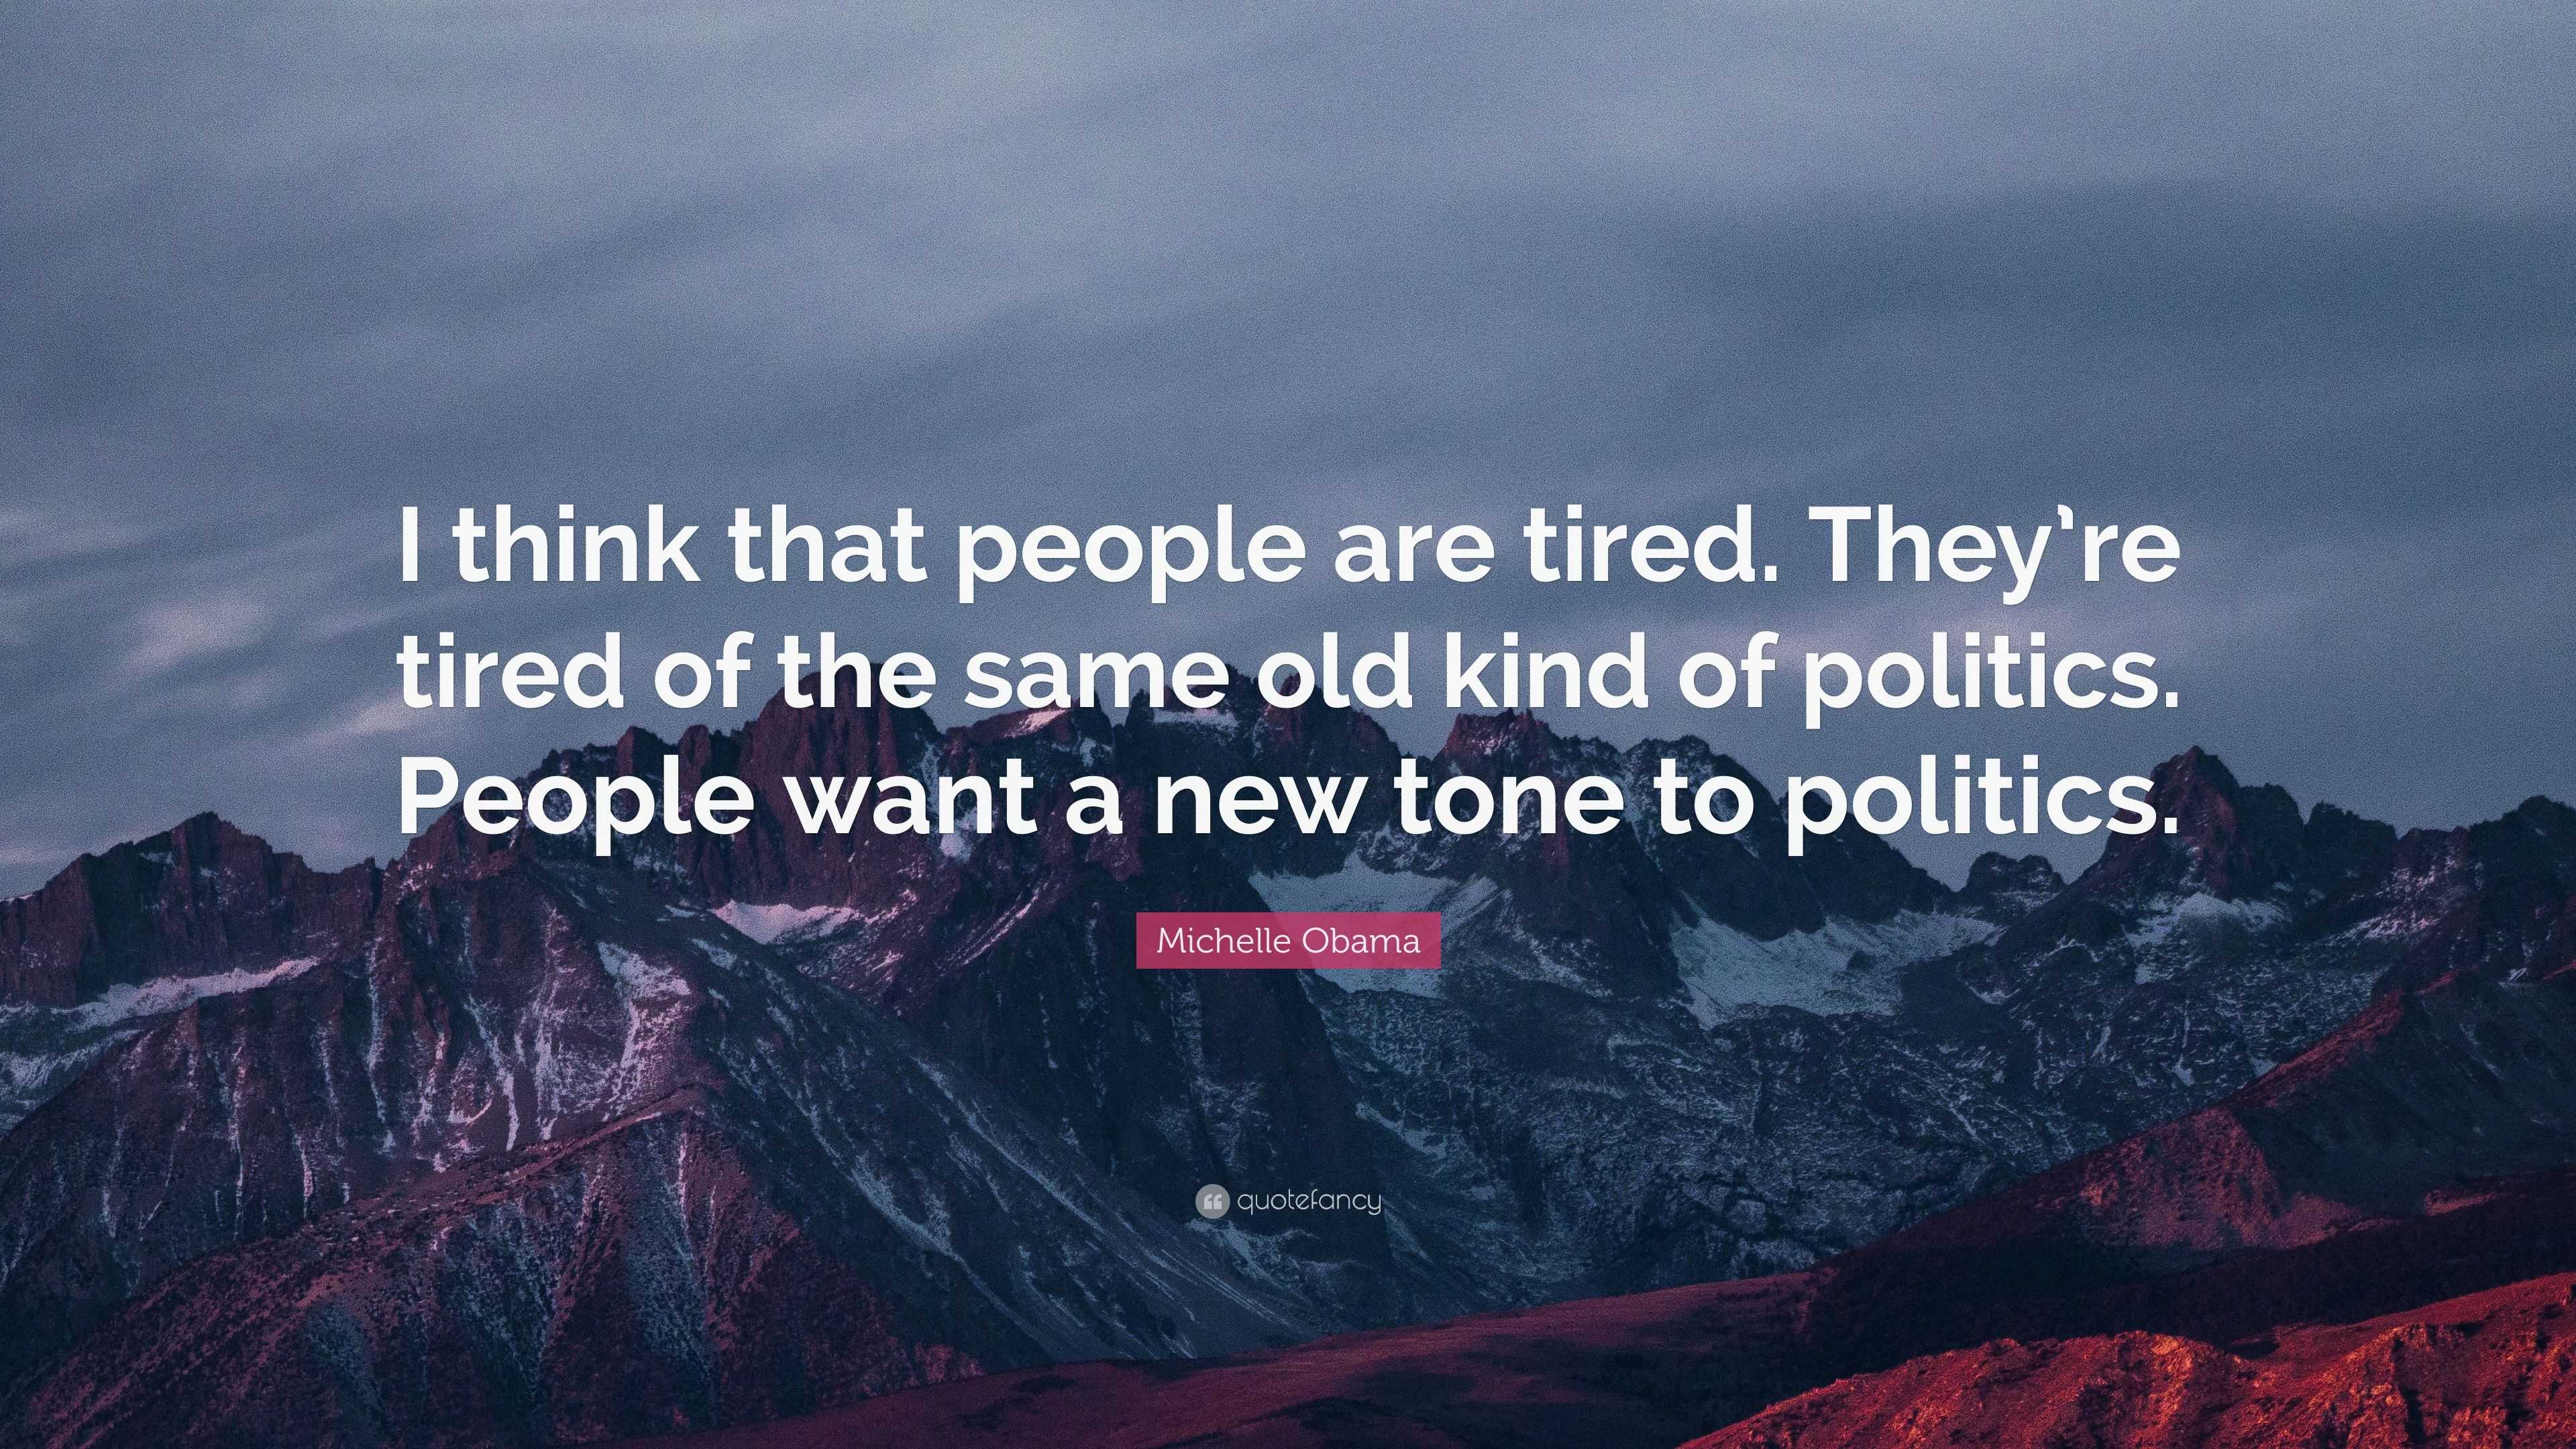 Michelle Obama Quote: “I think that people are tired. They’re tired of ...